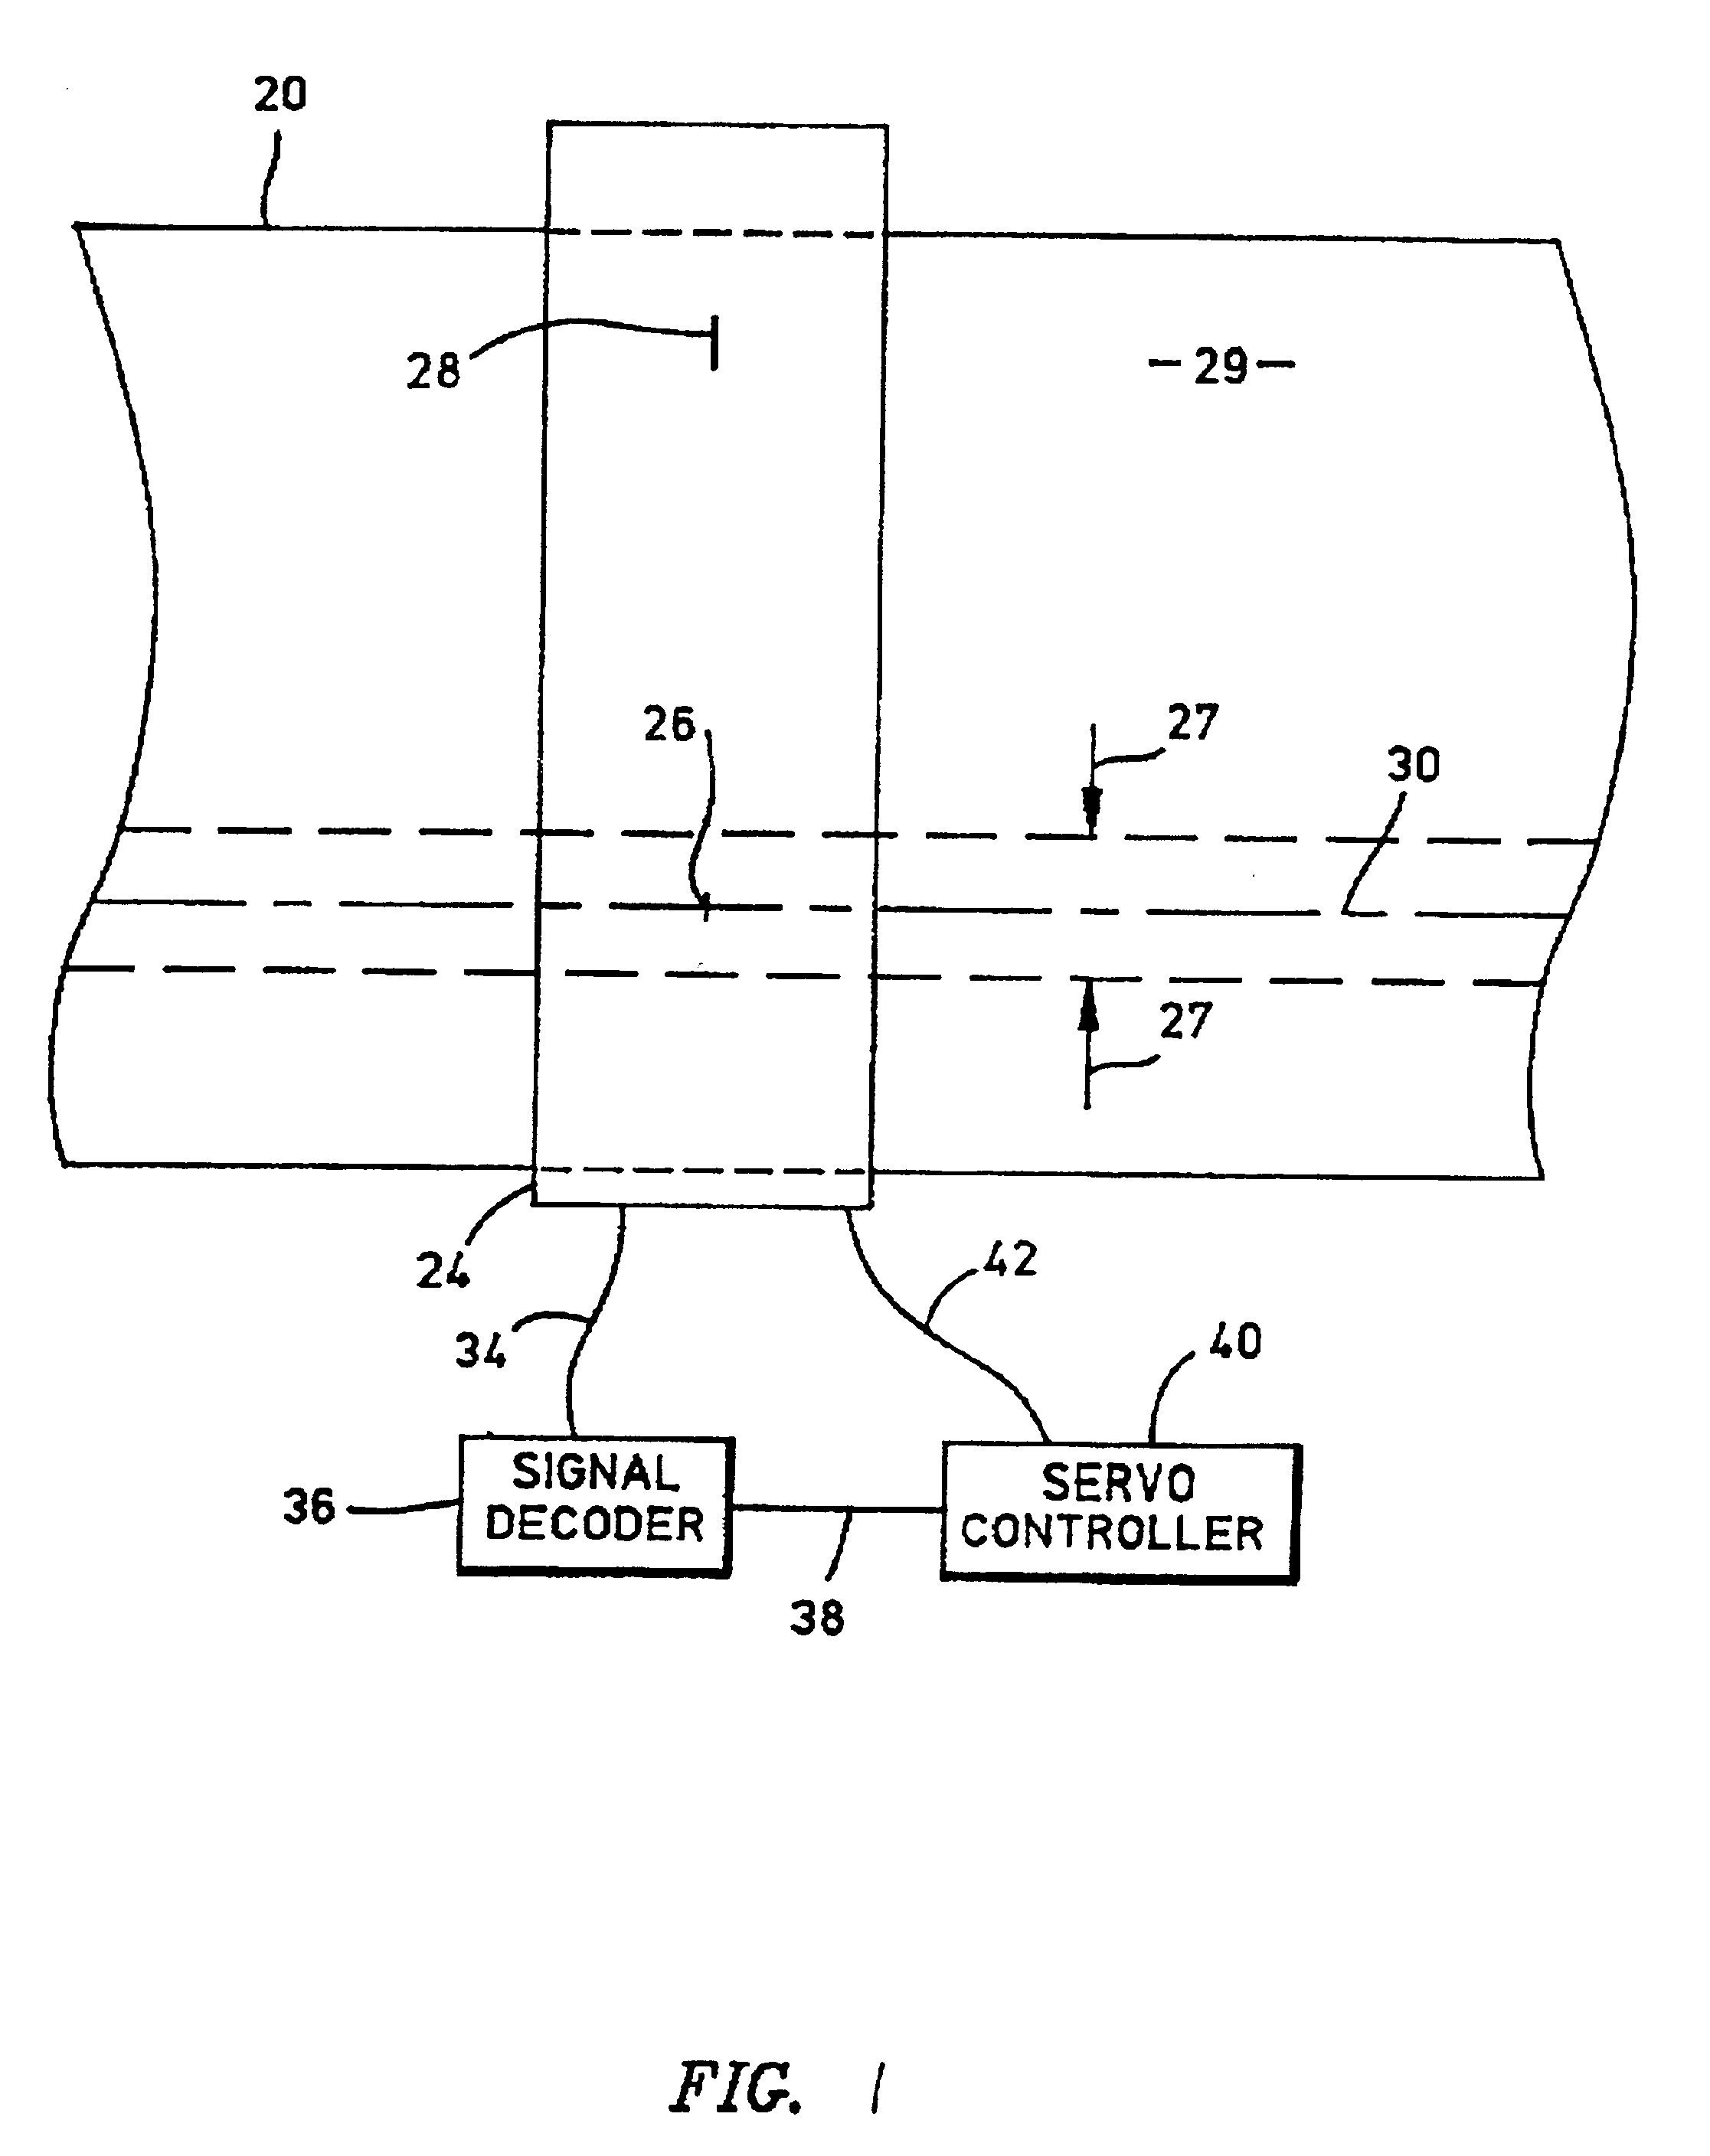 Timing based servo with fixed distances between transitions